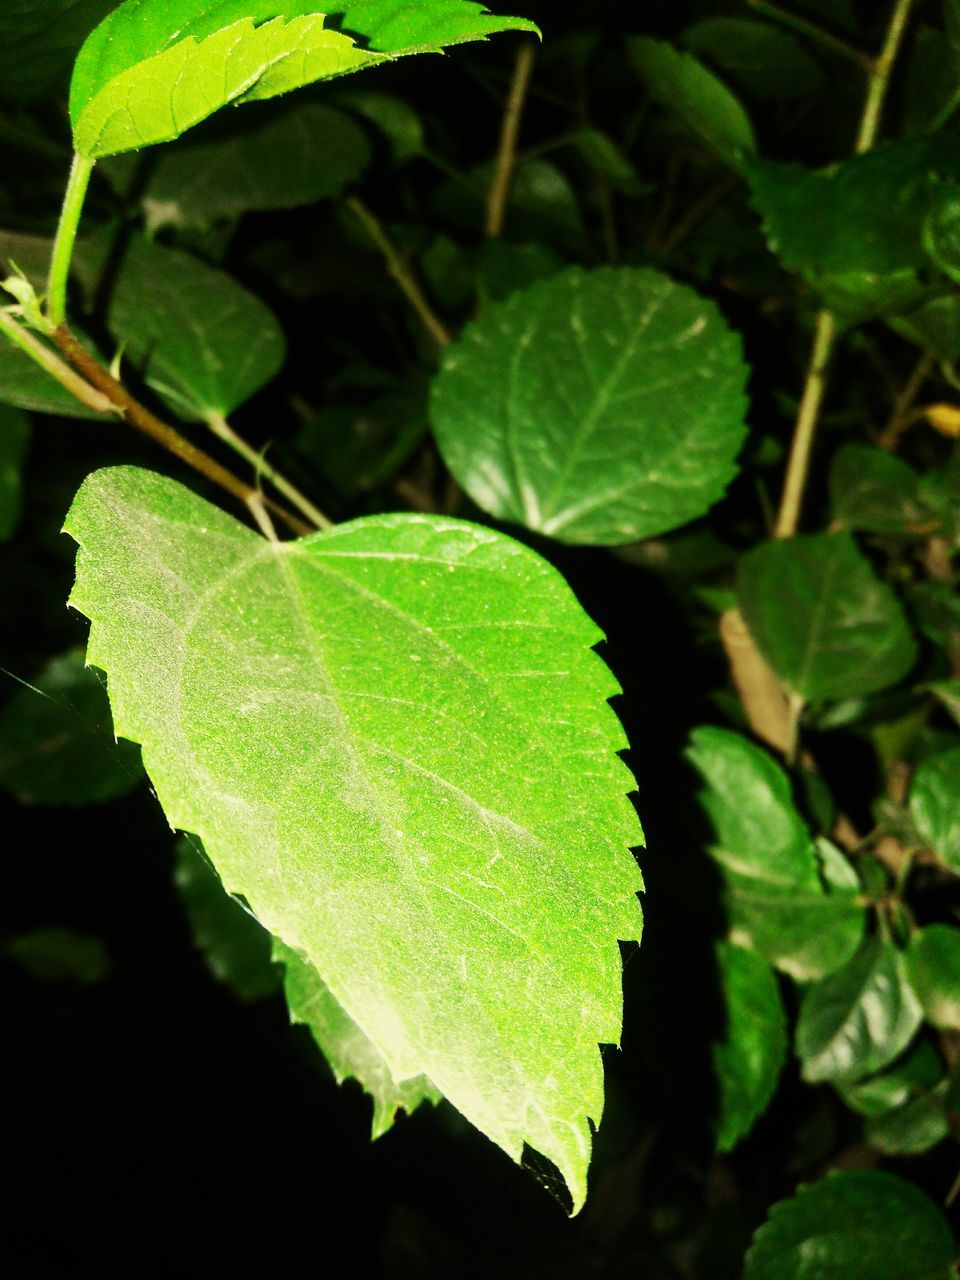 CLOSE-UP OF GREEN LEAVES IN PLANT